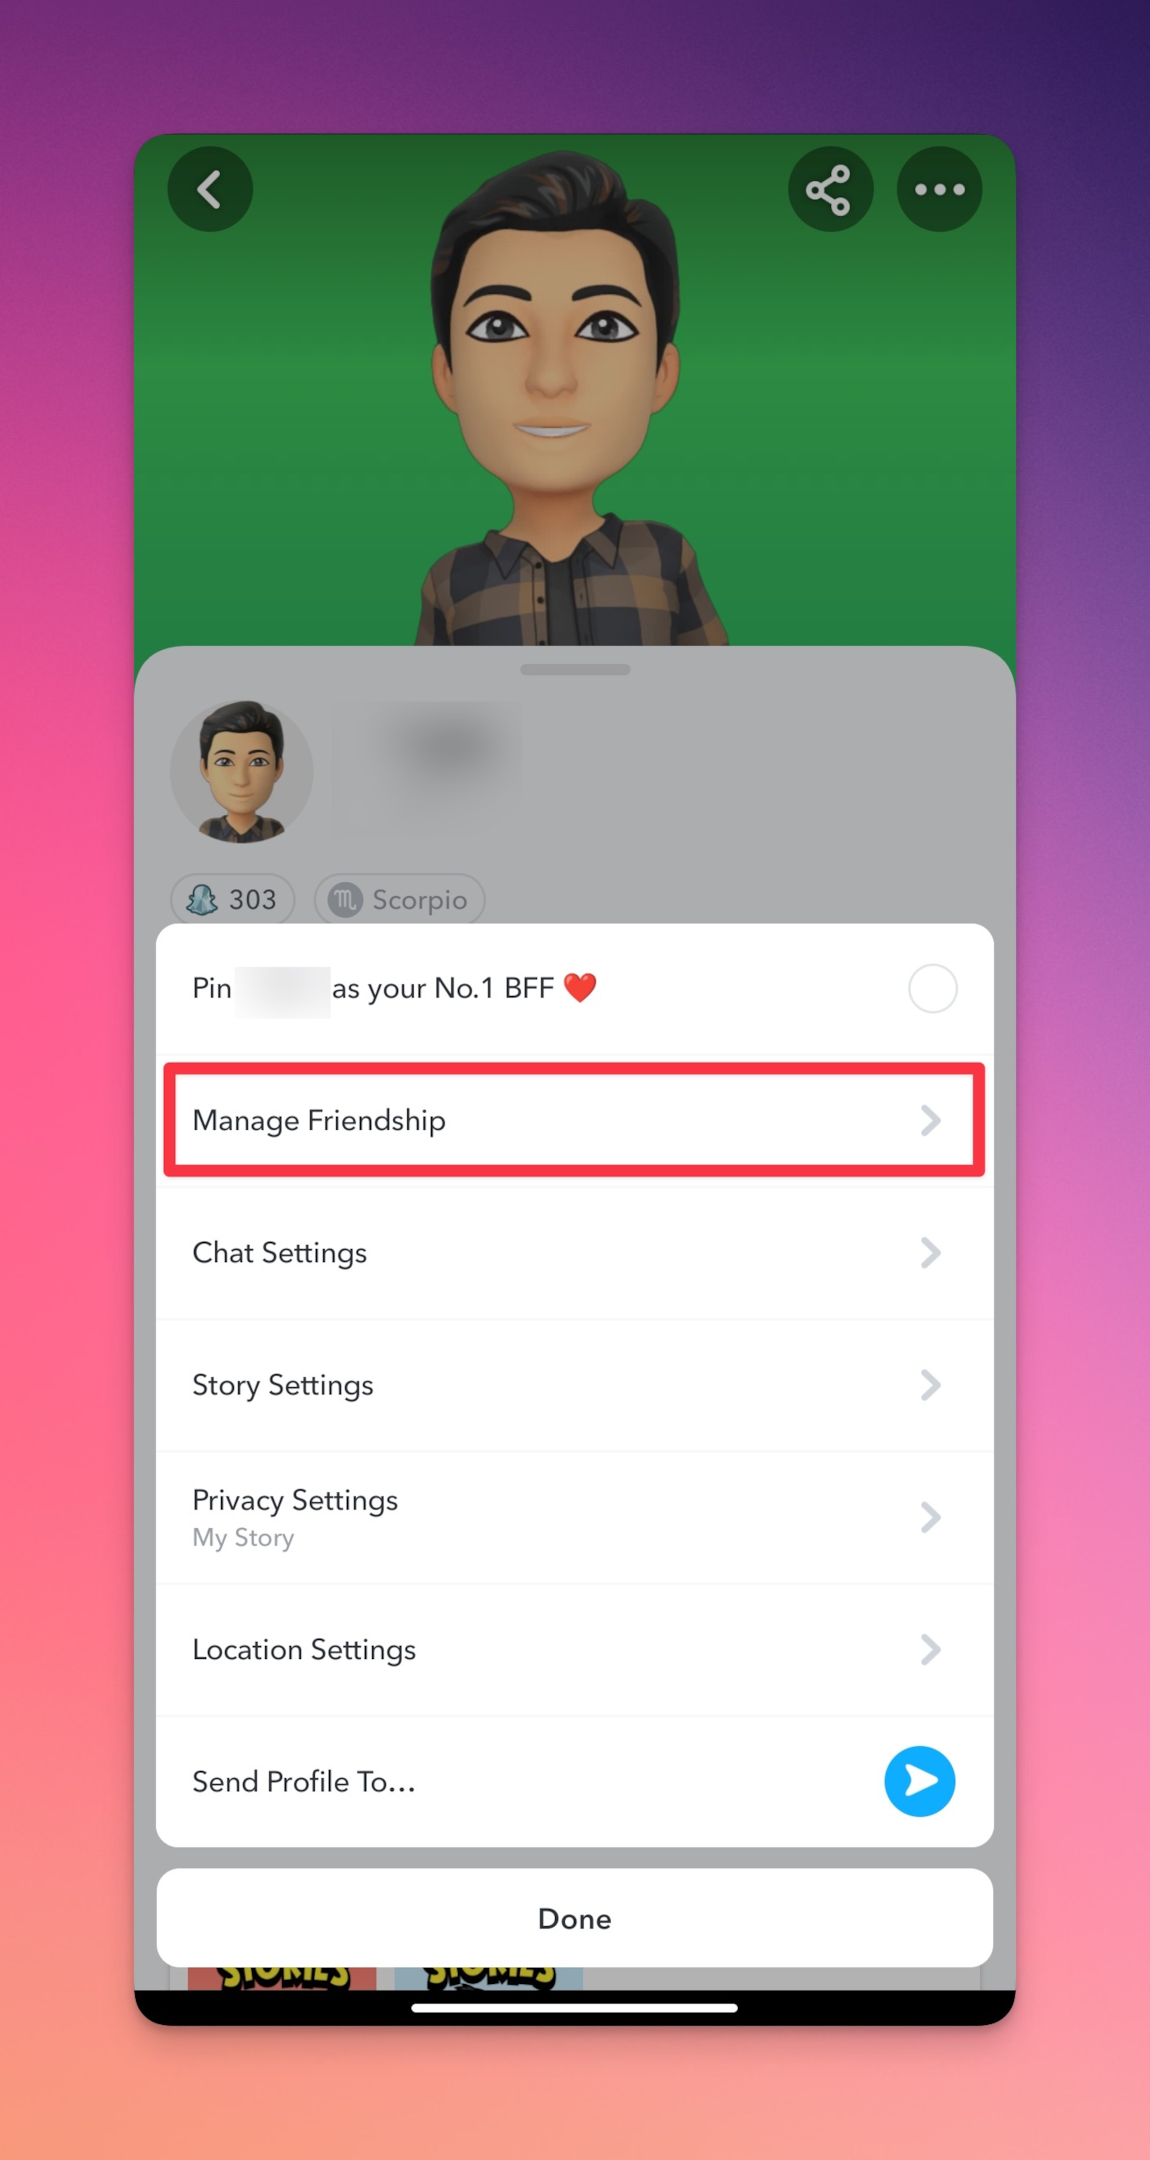 Remote.tools highlights the Manage friendship section on someone's snapchat profile